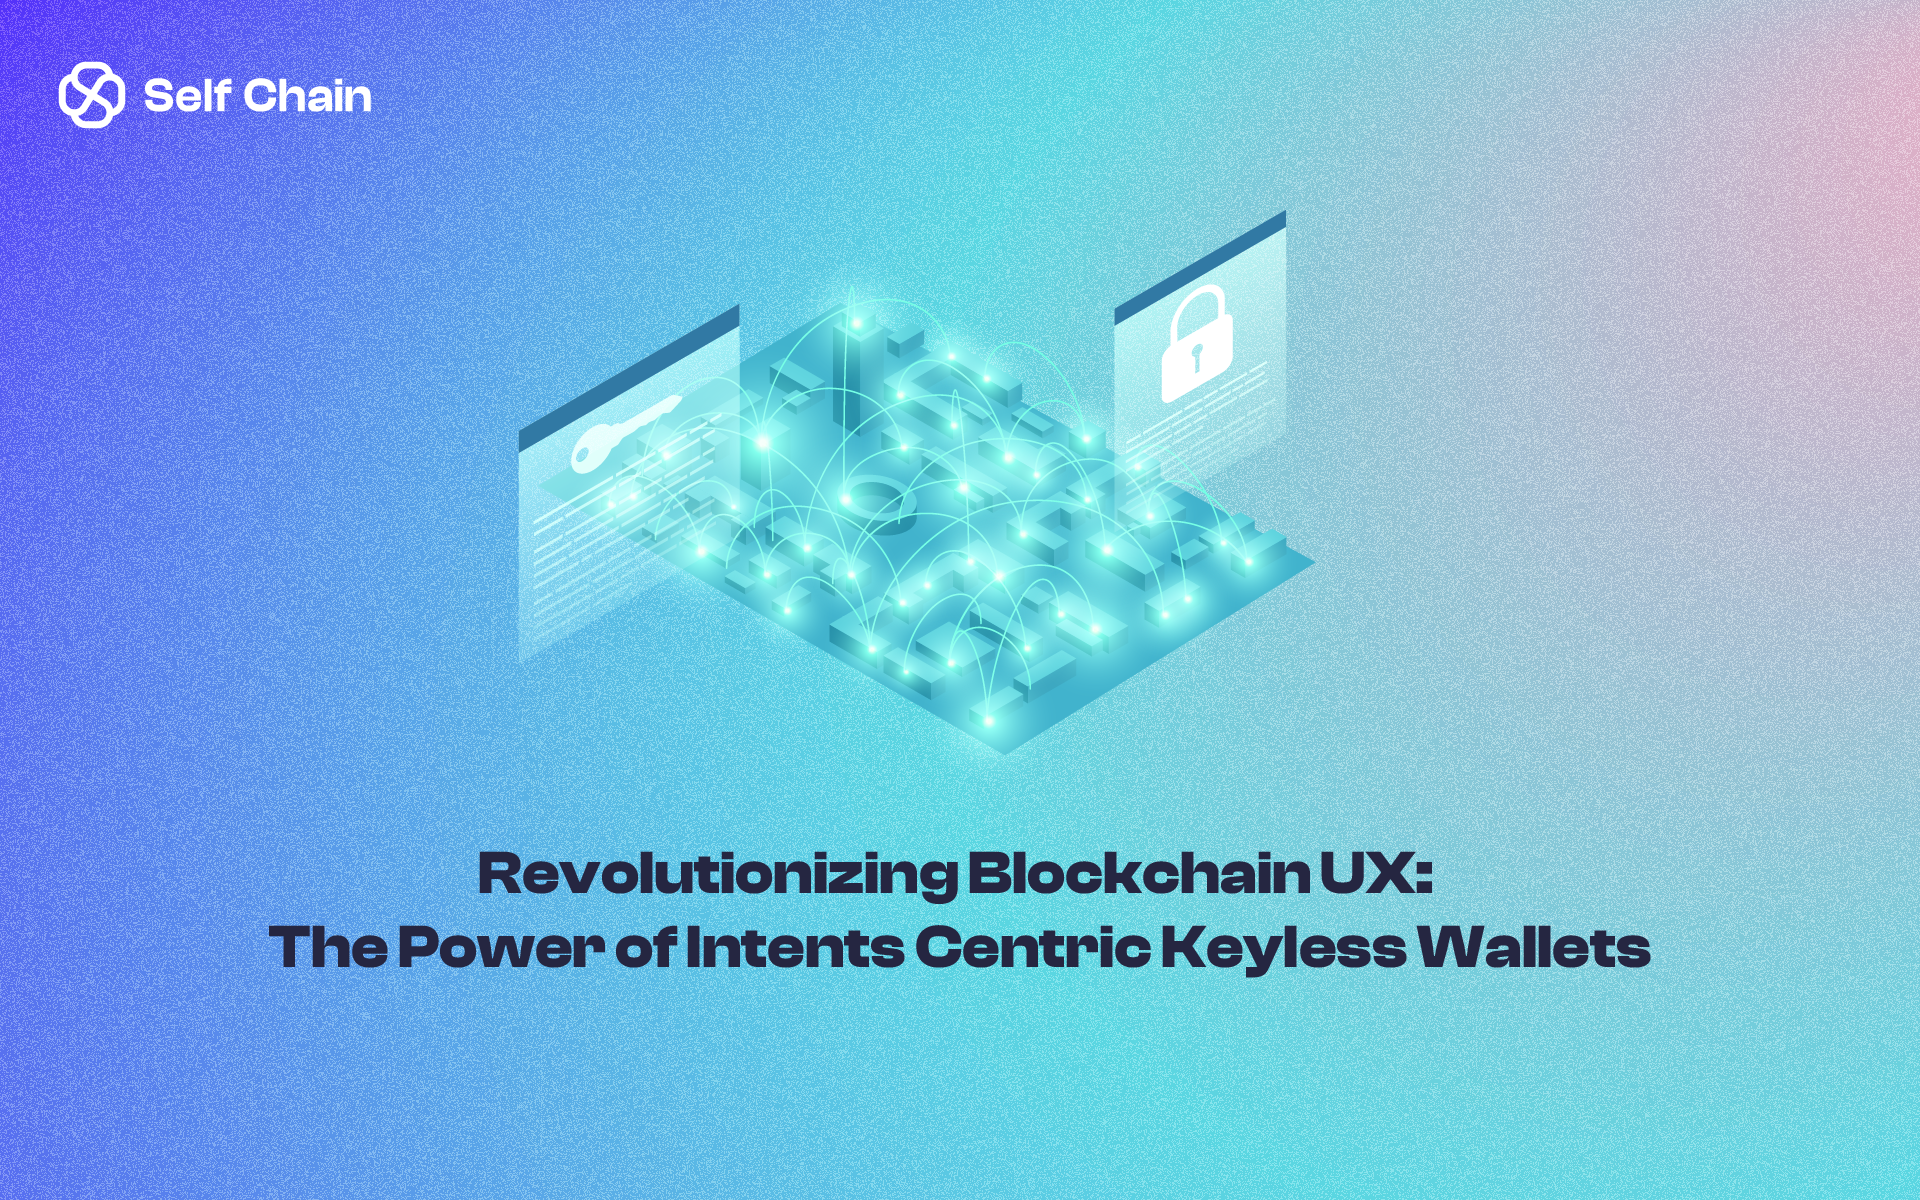 Revolutionizing Blockchain UX: The Power of Intents-Centric Keyless Wallets